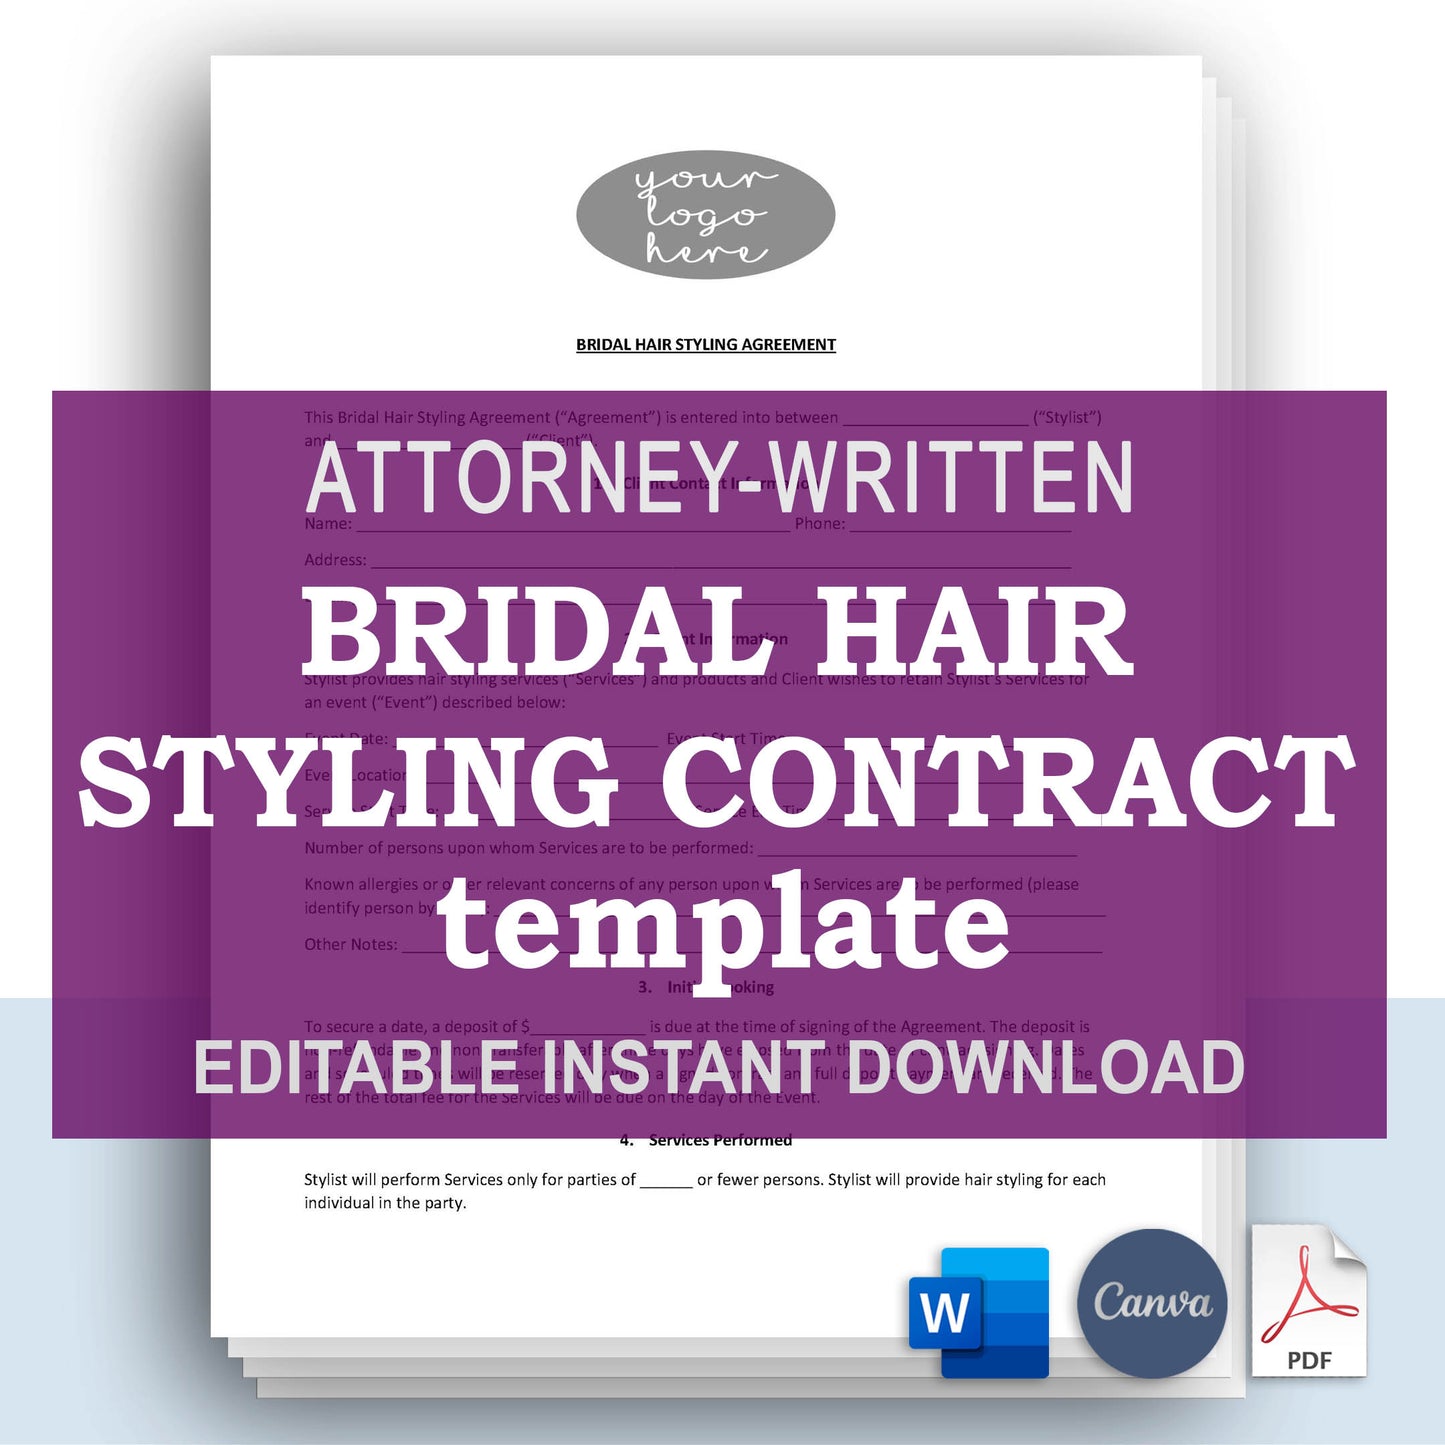 Bridal Hairstyling Contract Template, Attorney-Written Editable Download